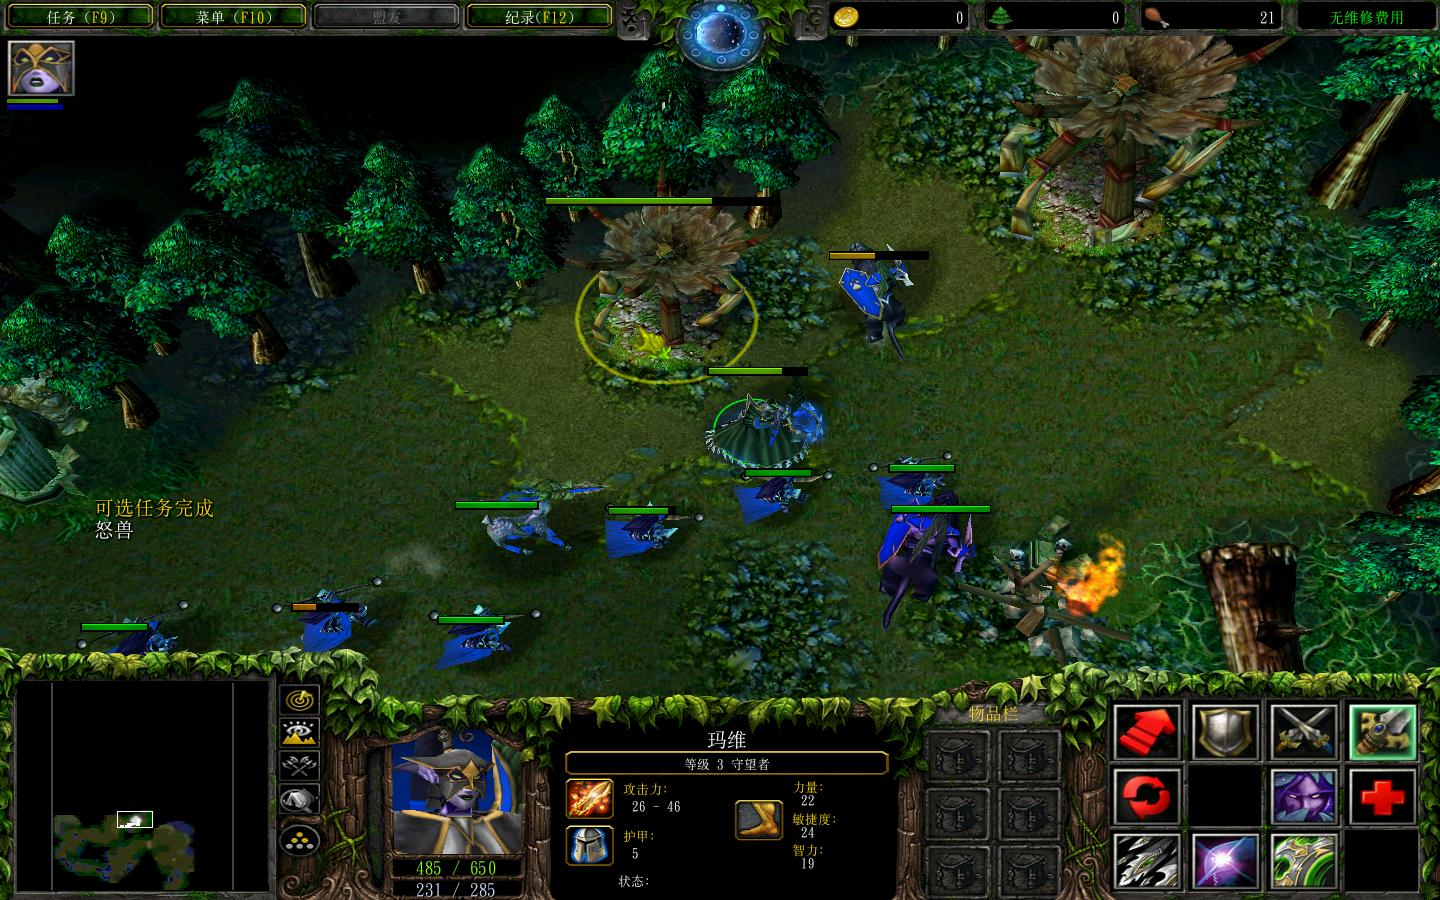 ħ3Warcraft III The Frozen Throne1.27aػ v1.0.3